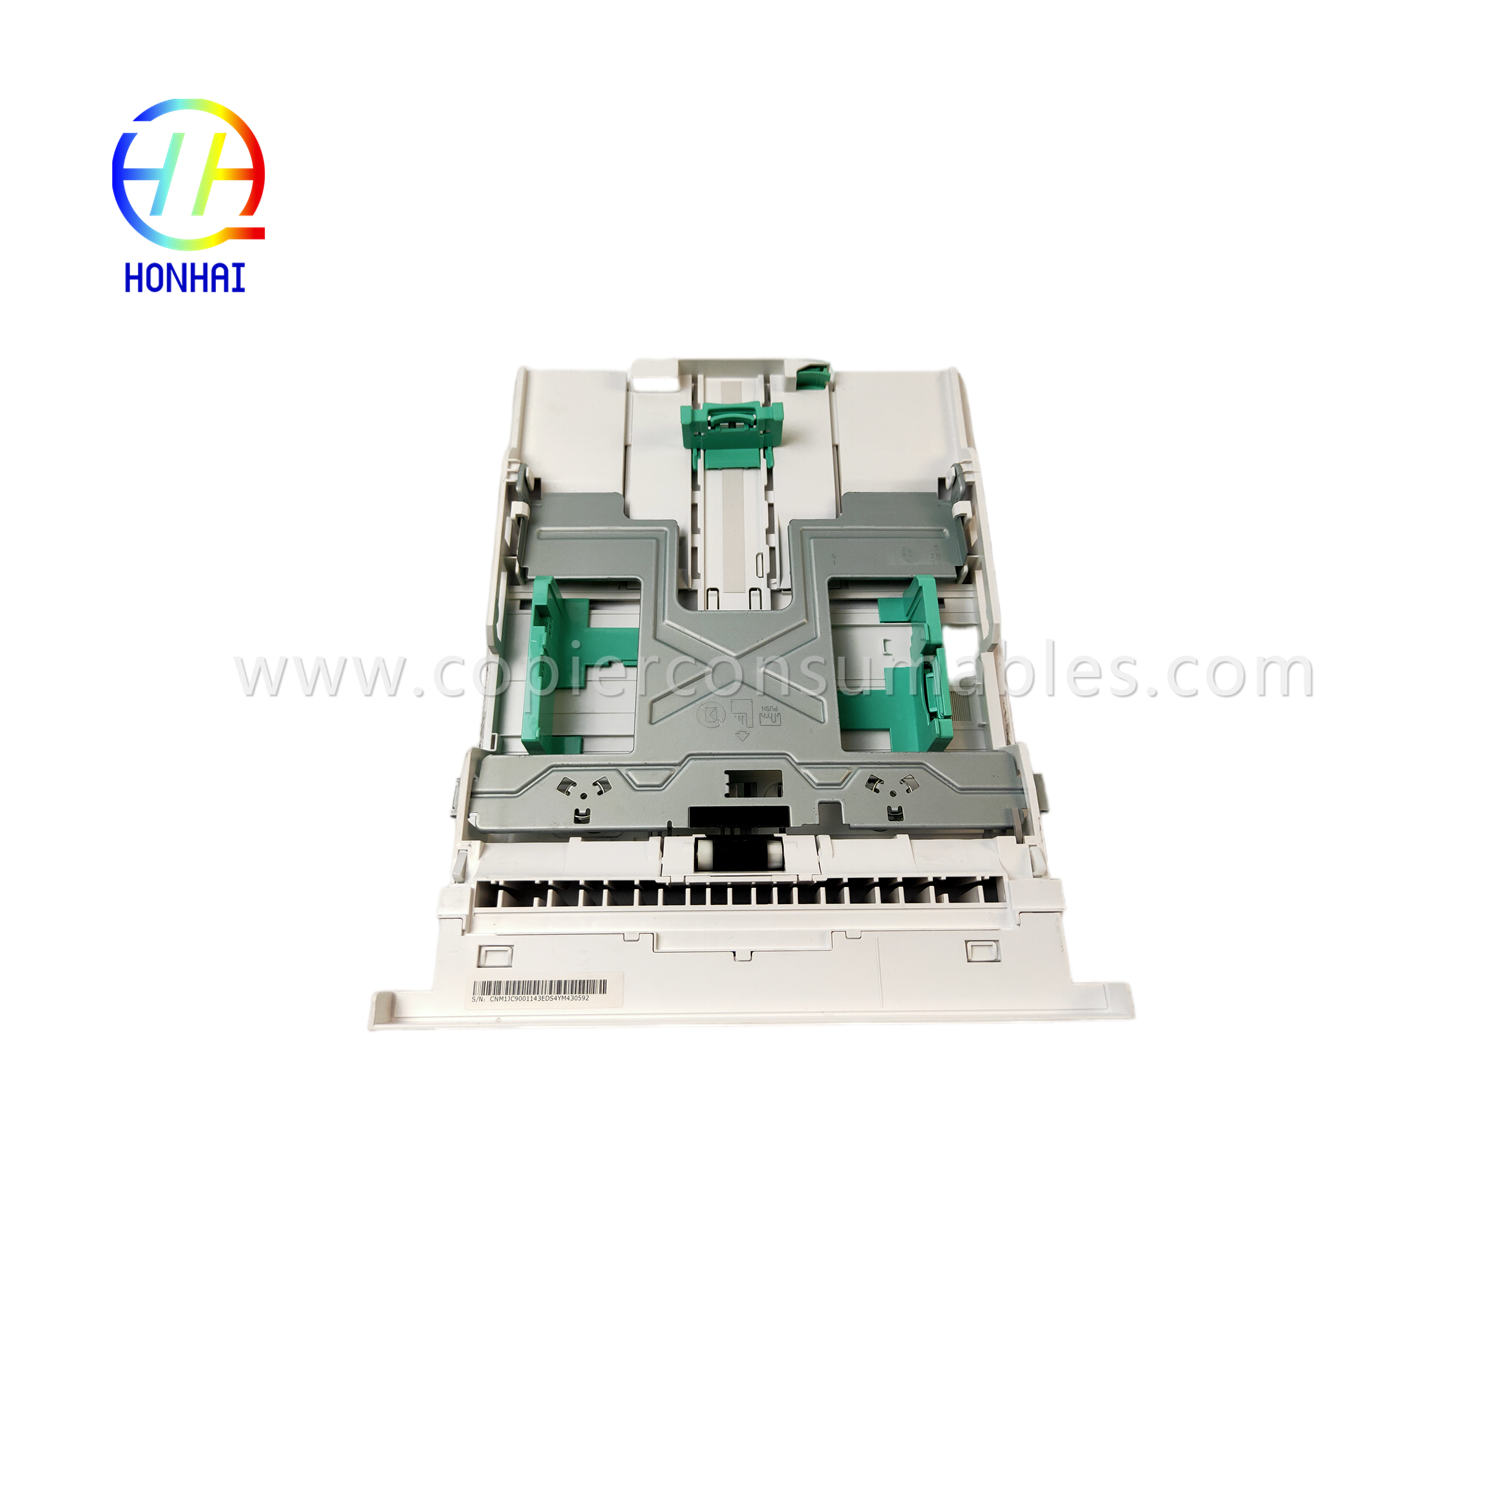 https://c585.goodao.net/apers-tray-assembly-for-xerox-phaser-3320dni-workcentre-3315dn-3325dni-050n00650-cassette-paper-tray-product/